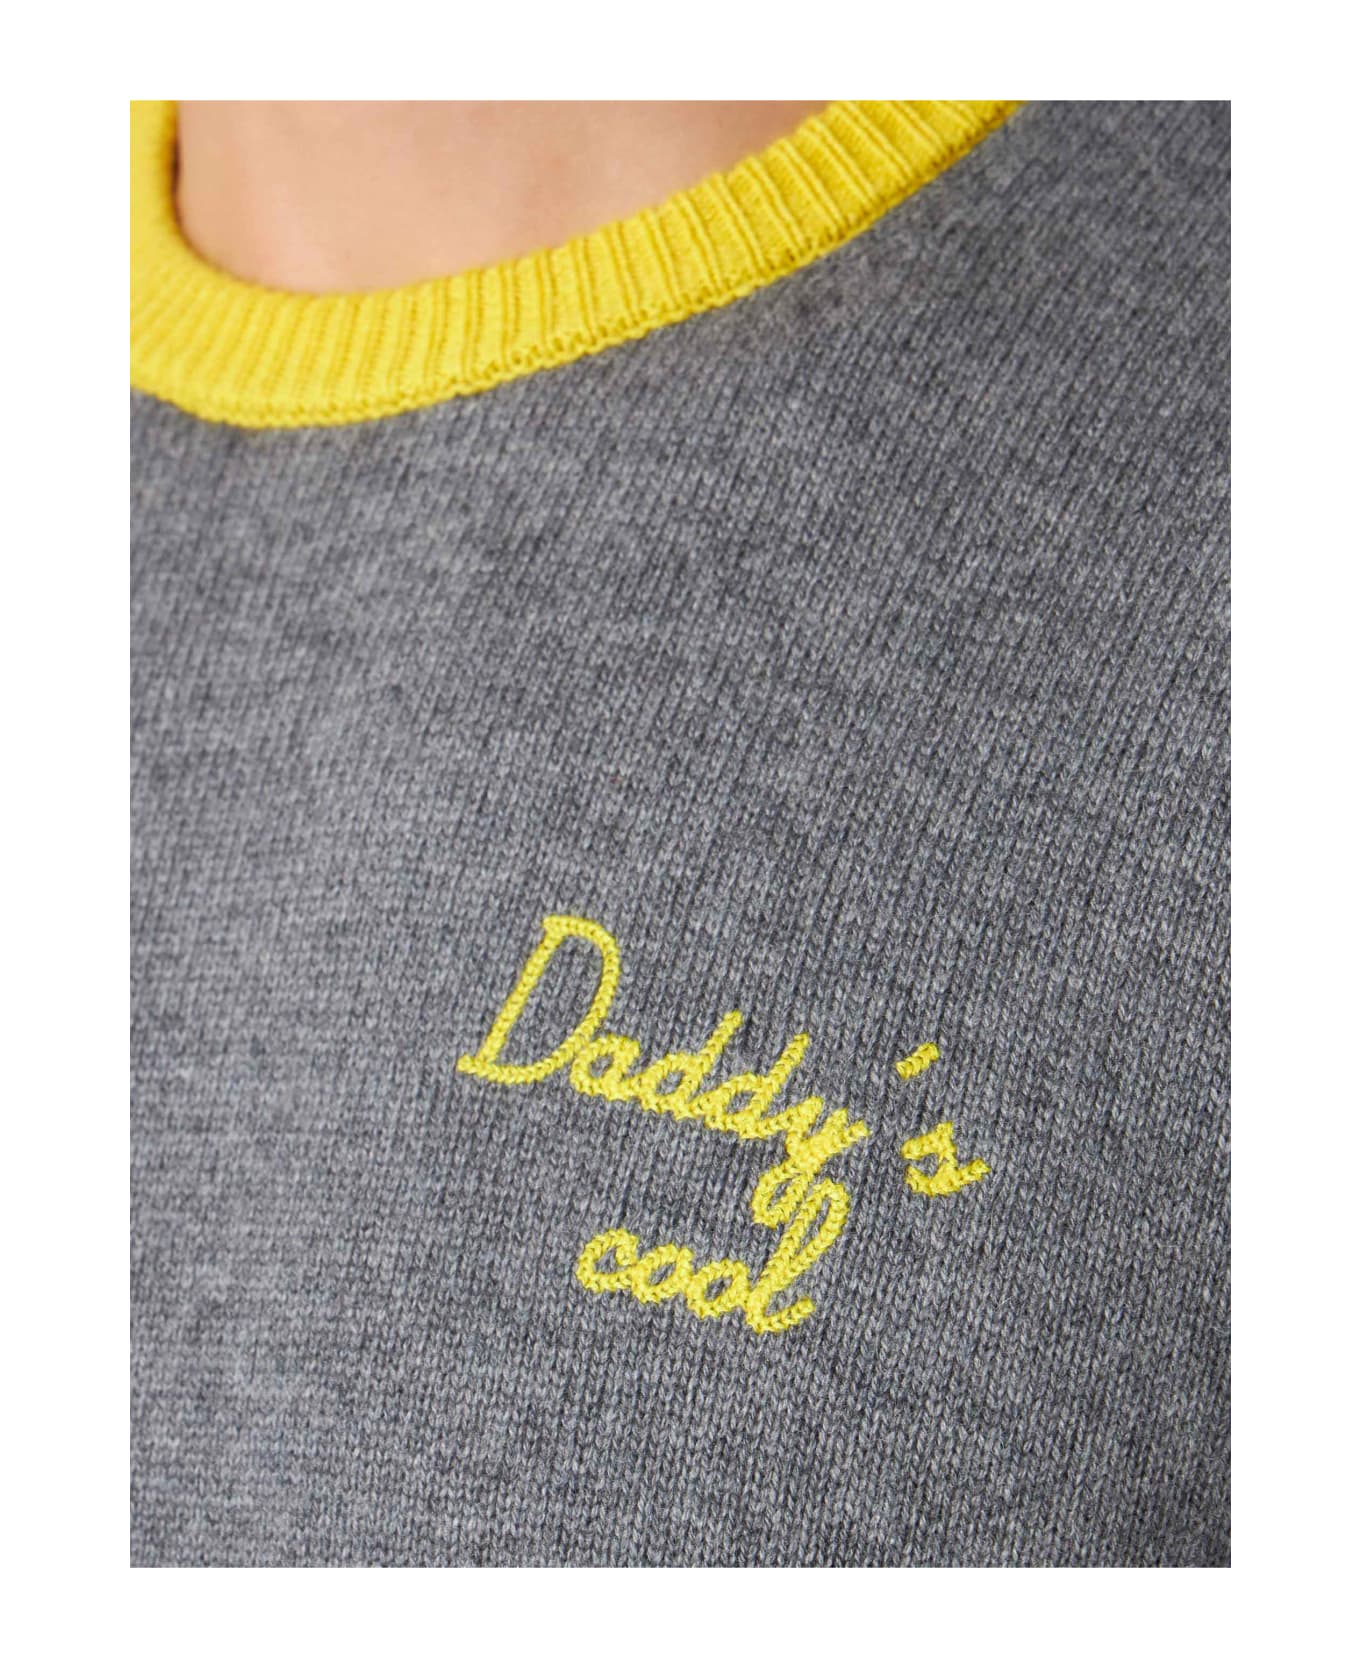 MC2 Saint Barth Man Grey Sweater With Daddy's Cool Embroidery - GREY